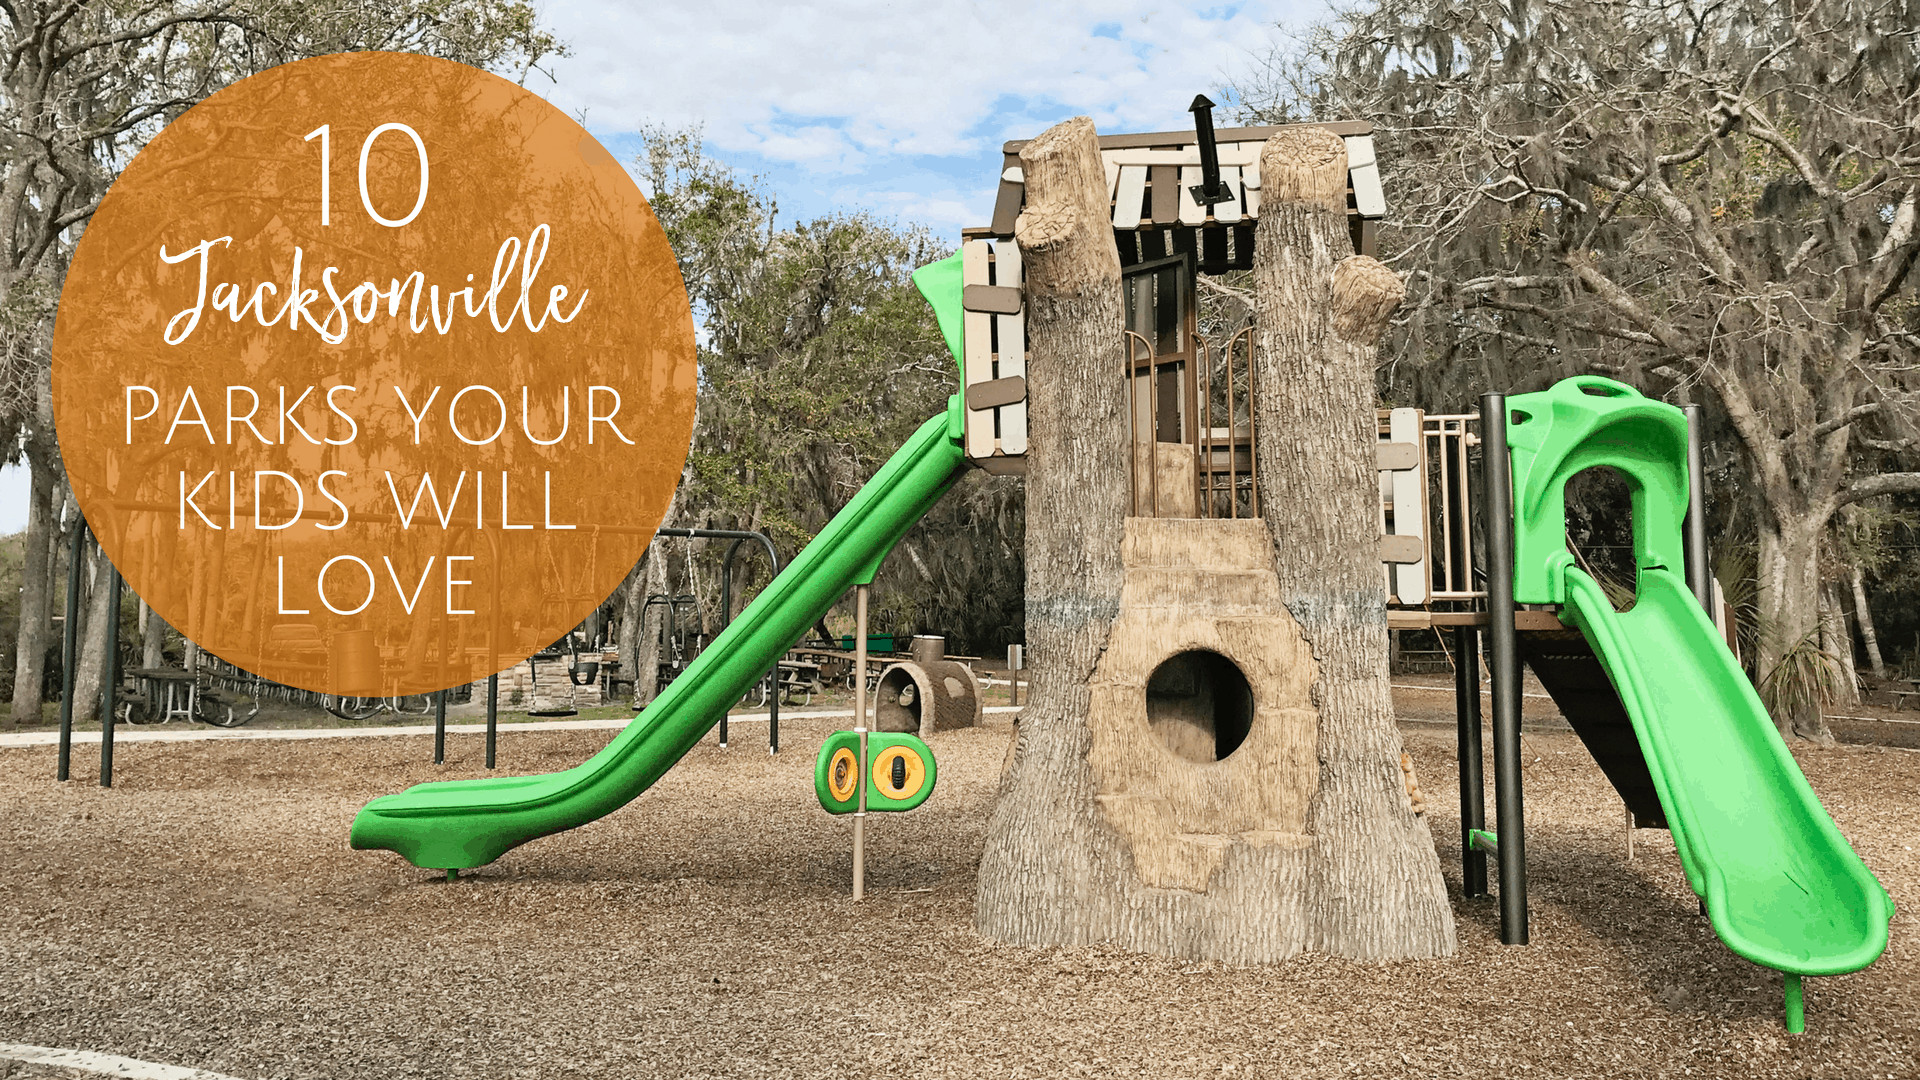 10 Jacksonville Parks Your Kids Will